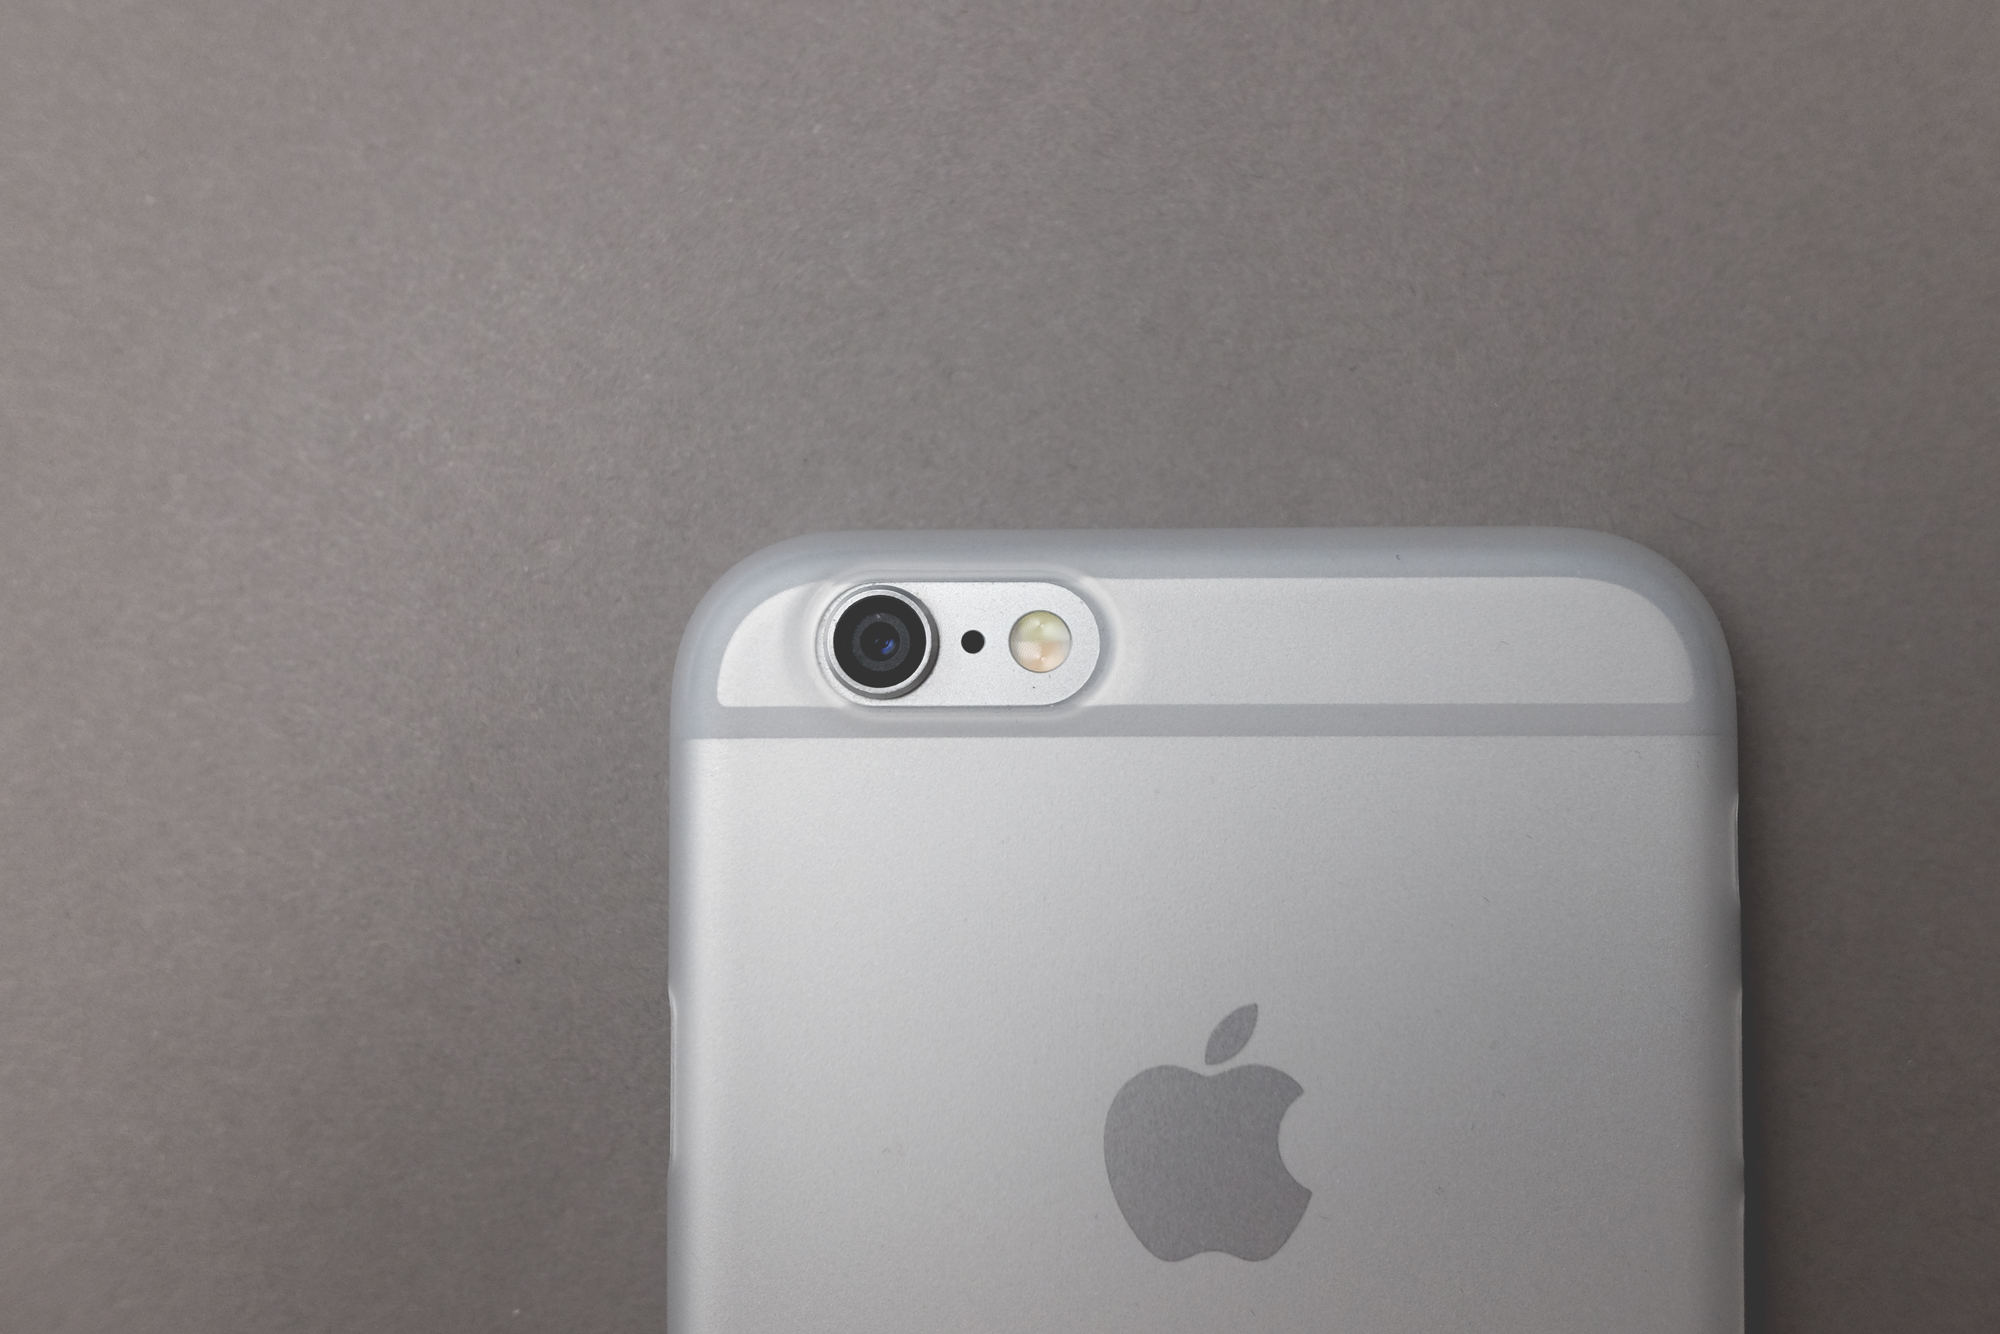  The frosted clear case offers a nice texture and enough clarity that the iPhone's design elements still remain visible.&nbsp; 